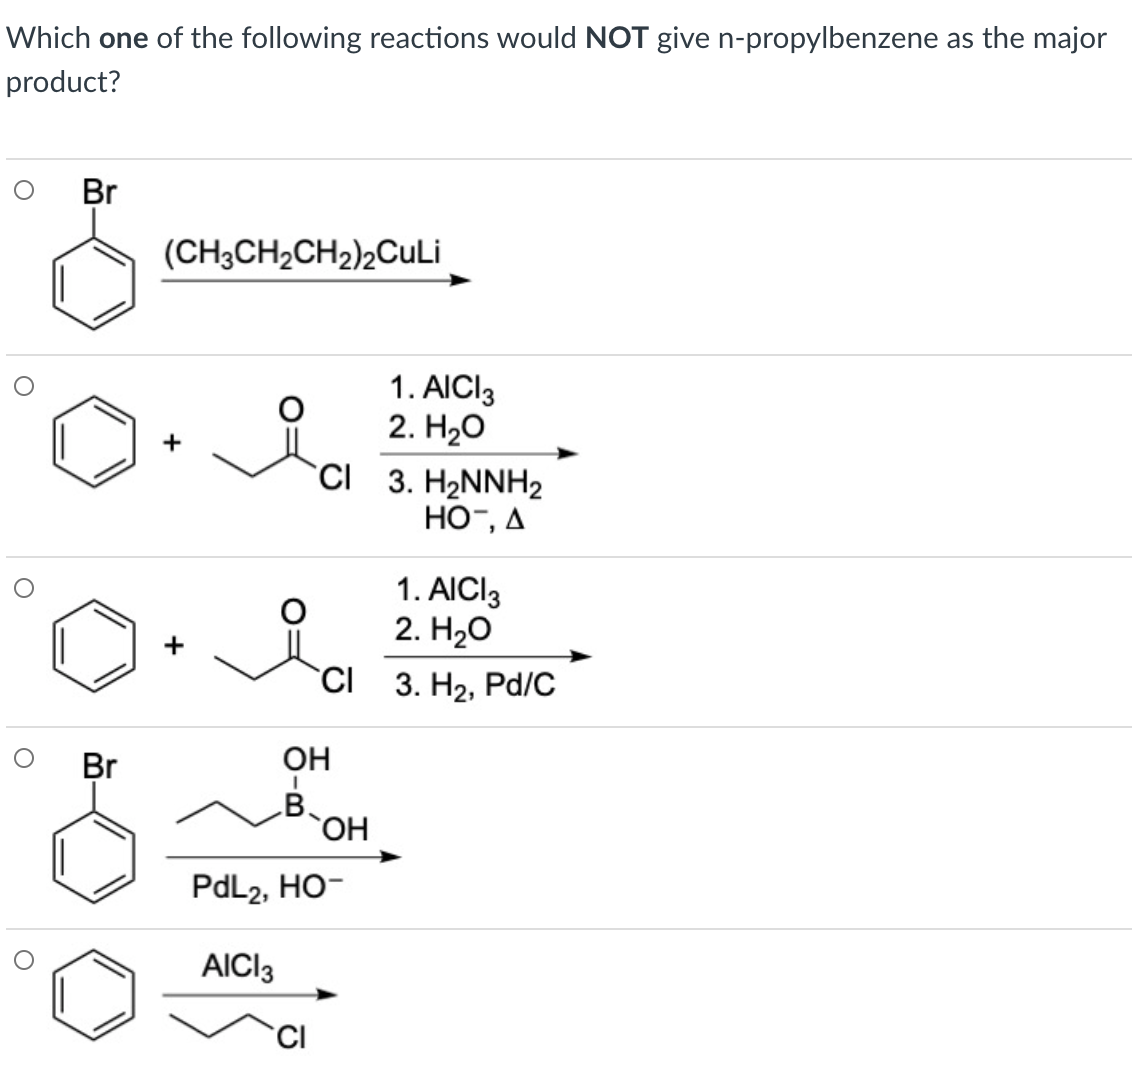 Which one of the following reactions would NOT give n-propylbenzene as the major
product?
Br
(CH3CH2CH2)2CuLi
1. AICI3
2. H20
CI 3. H2NNH2
HO¯, A
+
1. AICI3
2. H2о
+
CI 3. H2, Pd/C
Br
OH
B.
HO,
PdL2, HO-
AICI3
CI
